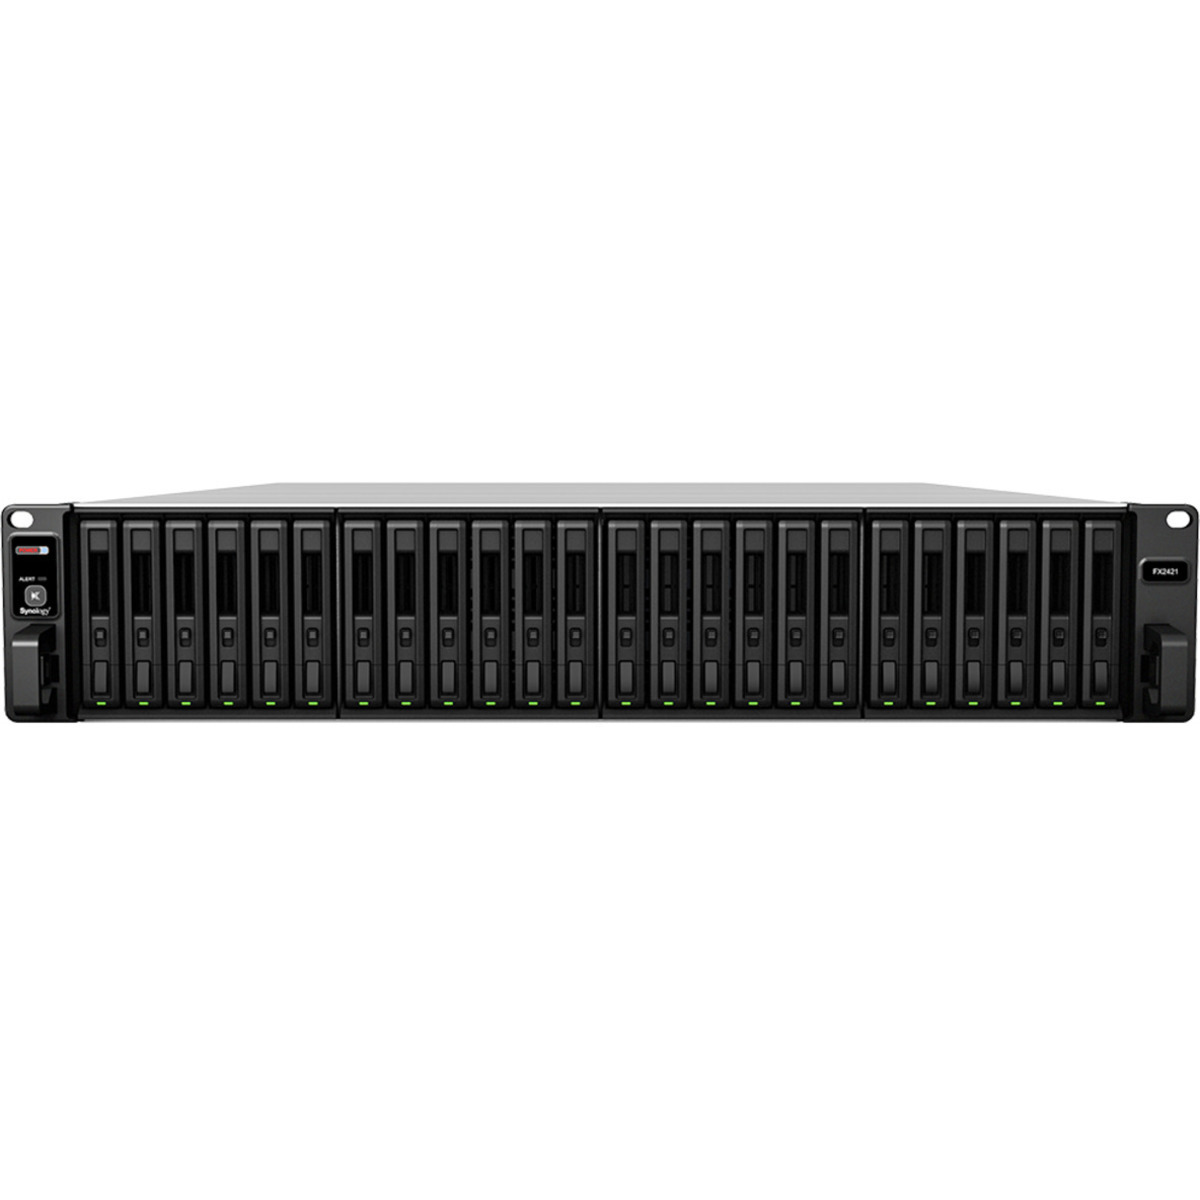 buy $10214 Synology FX2421 48tb RackMount Expansion Enclosure 24x2000gb Western Digital Red SA500 WDS200T1R0A 2.5 SATA 6Gb/s SSD NAS Class Drives Installed - Burn-In Tested - nas headquarters buy network attached storage server device das new raid-5 free shipping usa FX2421